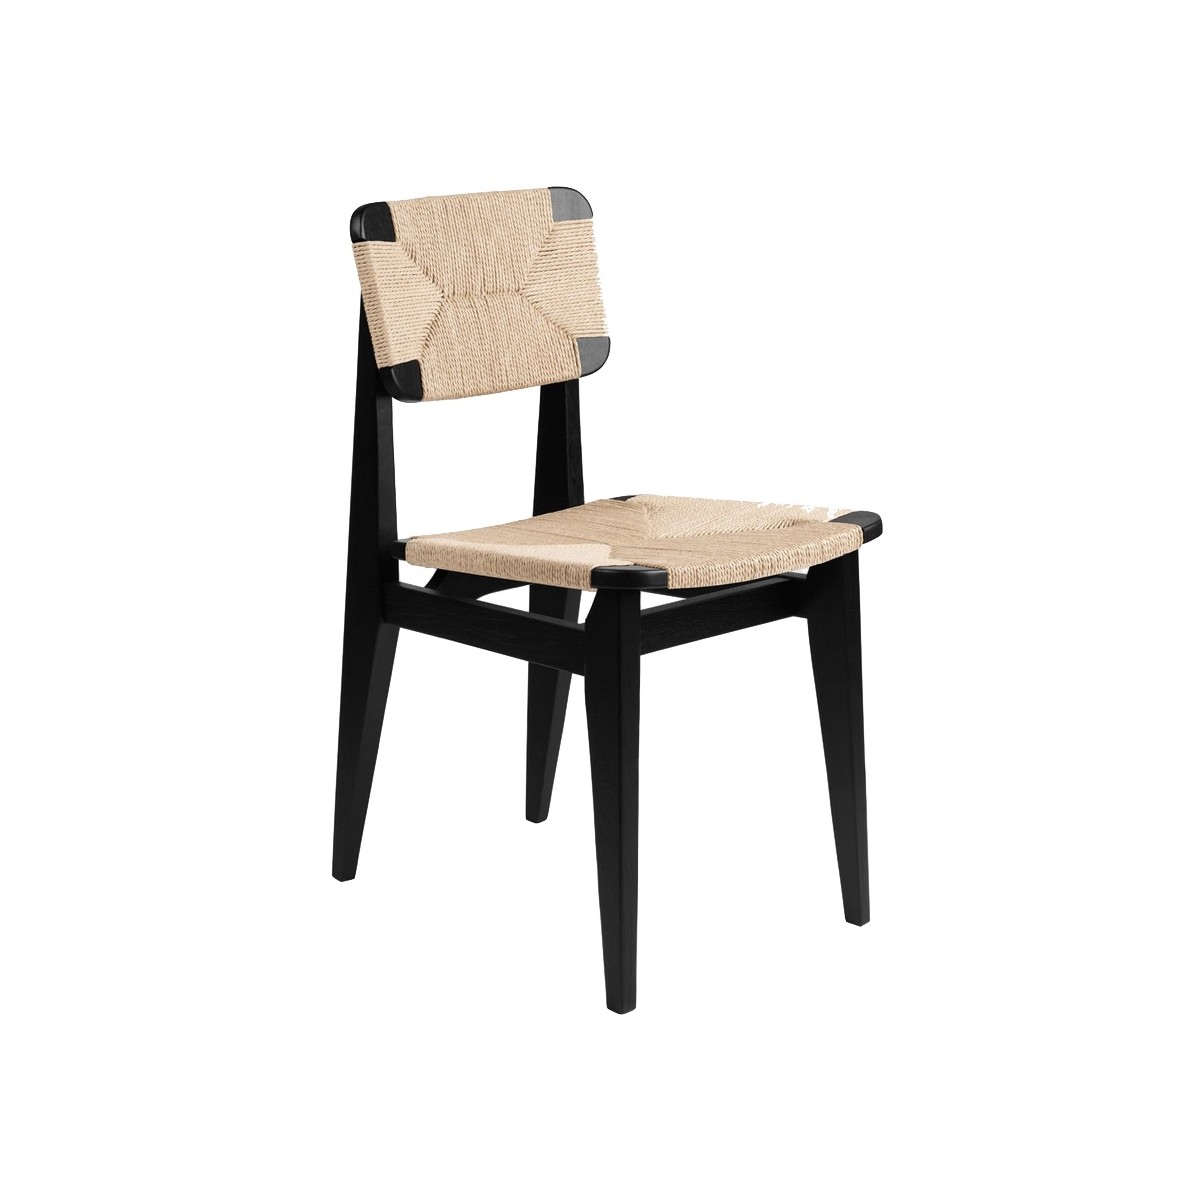 Black Stained Oak, papercord seat & back – C-Chair